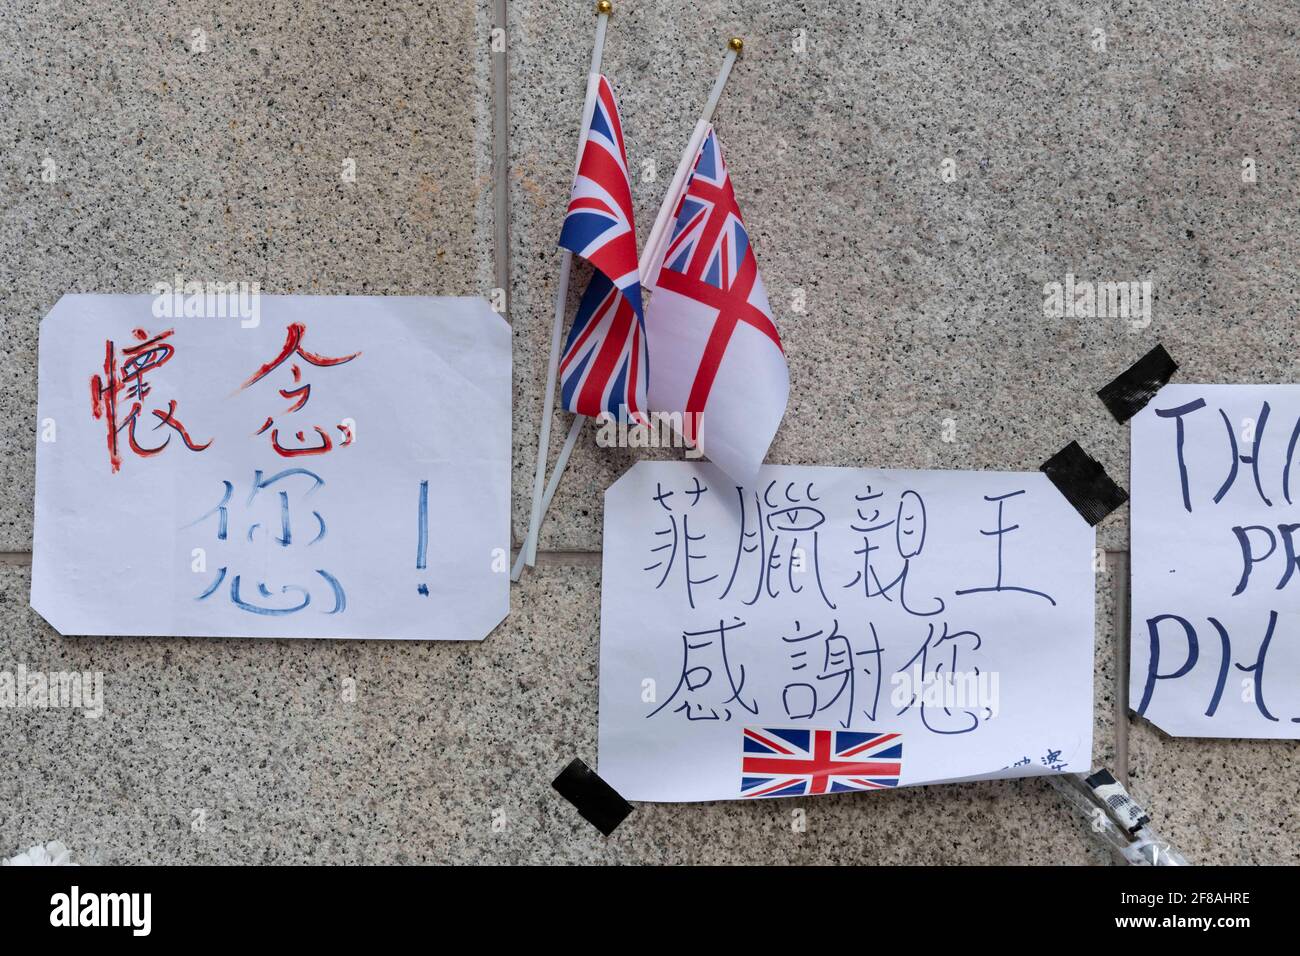 Hong Kong, Hong Kong, China. 13th Apr, 2021. Flowers and tributes to Prince Philip, Duke of Edinburgh placed outside The British Consulate-General offices in Admiralty Hong Kong. The 99 year old husband of Queen Elizabeth II passed away on 9 April 2021 at Windsor Castle.As an former British colony, many Hong Kong citizens still have fond memories for their British connections. Credit: Jayne Russell/ZUMA Wire/Alamy Live News Stock Photo